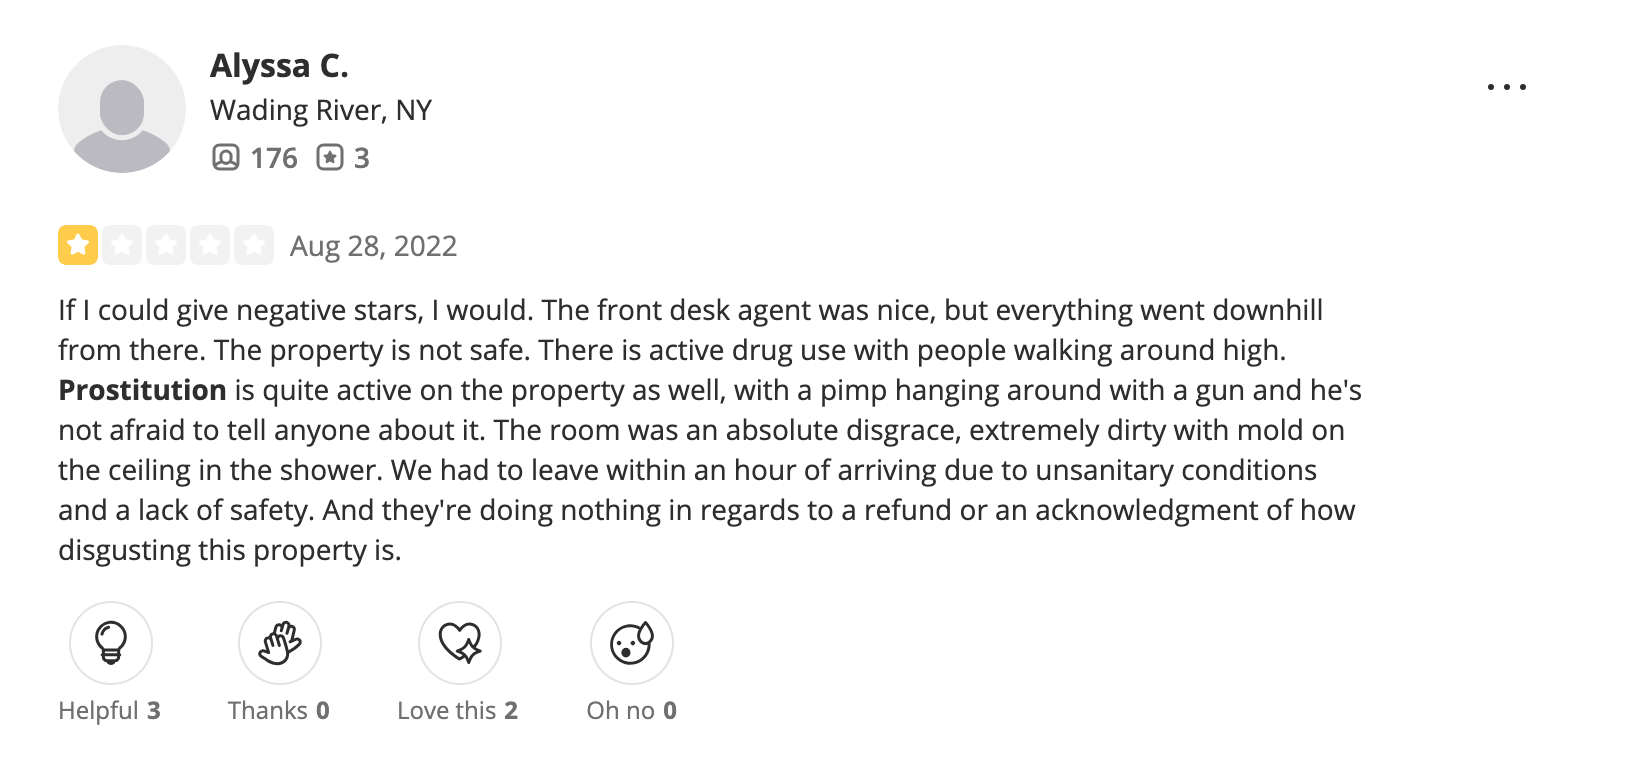 A review left by a customer who stayed at a Red Roof Inn in Connecticut.